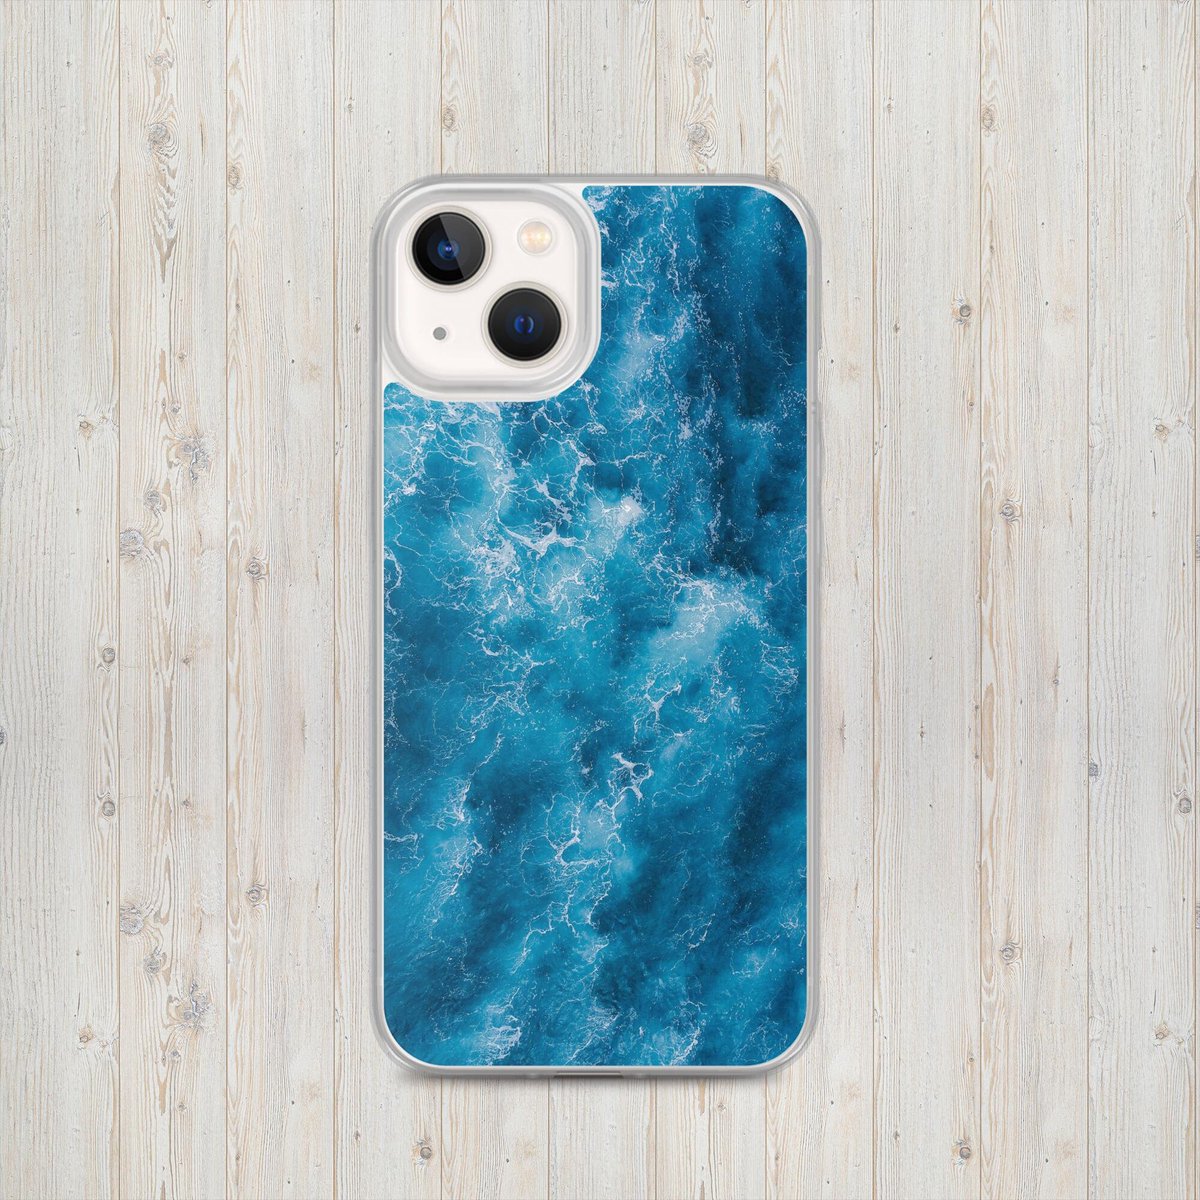 Our Aesthetic Ocean iPhone! - rb.gy/8vrh9 
#PhoneCase
#PhoneAccessories
#ProtectYourPhone
#CaseForiPhone
#CaseOfTheDay
#CutePhoneCases
#iPhoneXCase
#iPhone11Case
#iPhone12Case
#iPhoneSECase
#iPhoneXRCase